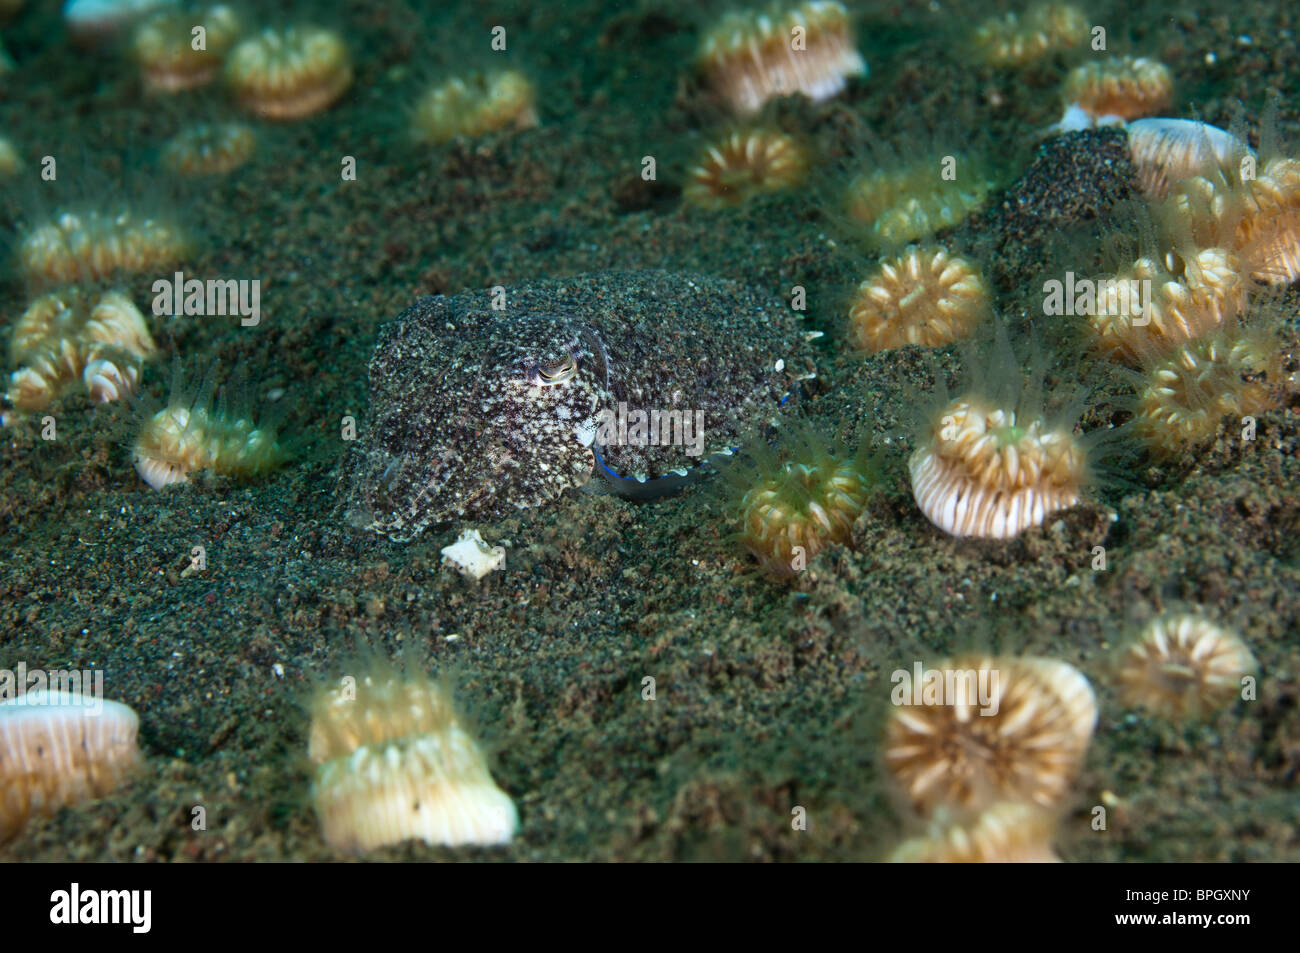 A small Papuan cuttlefish hiding amongst cup corals, Puri Jati, Bali, Indonesia. Stock Photo